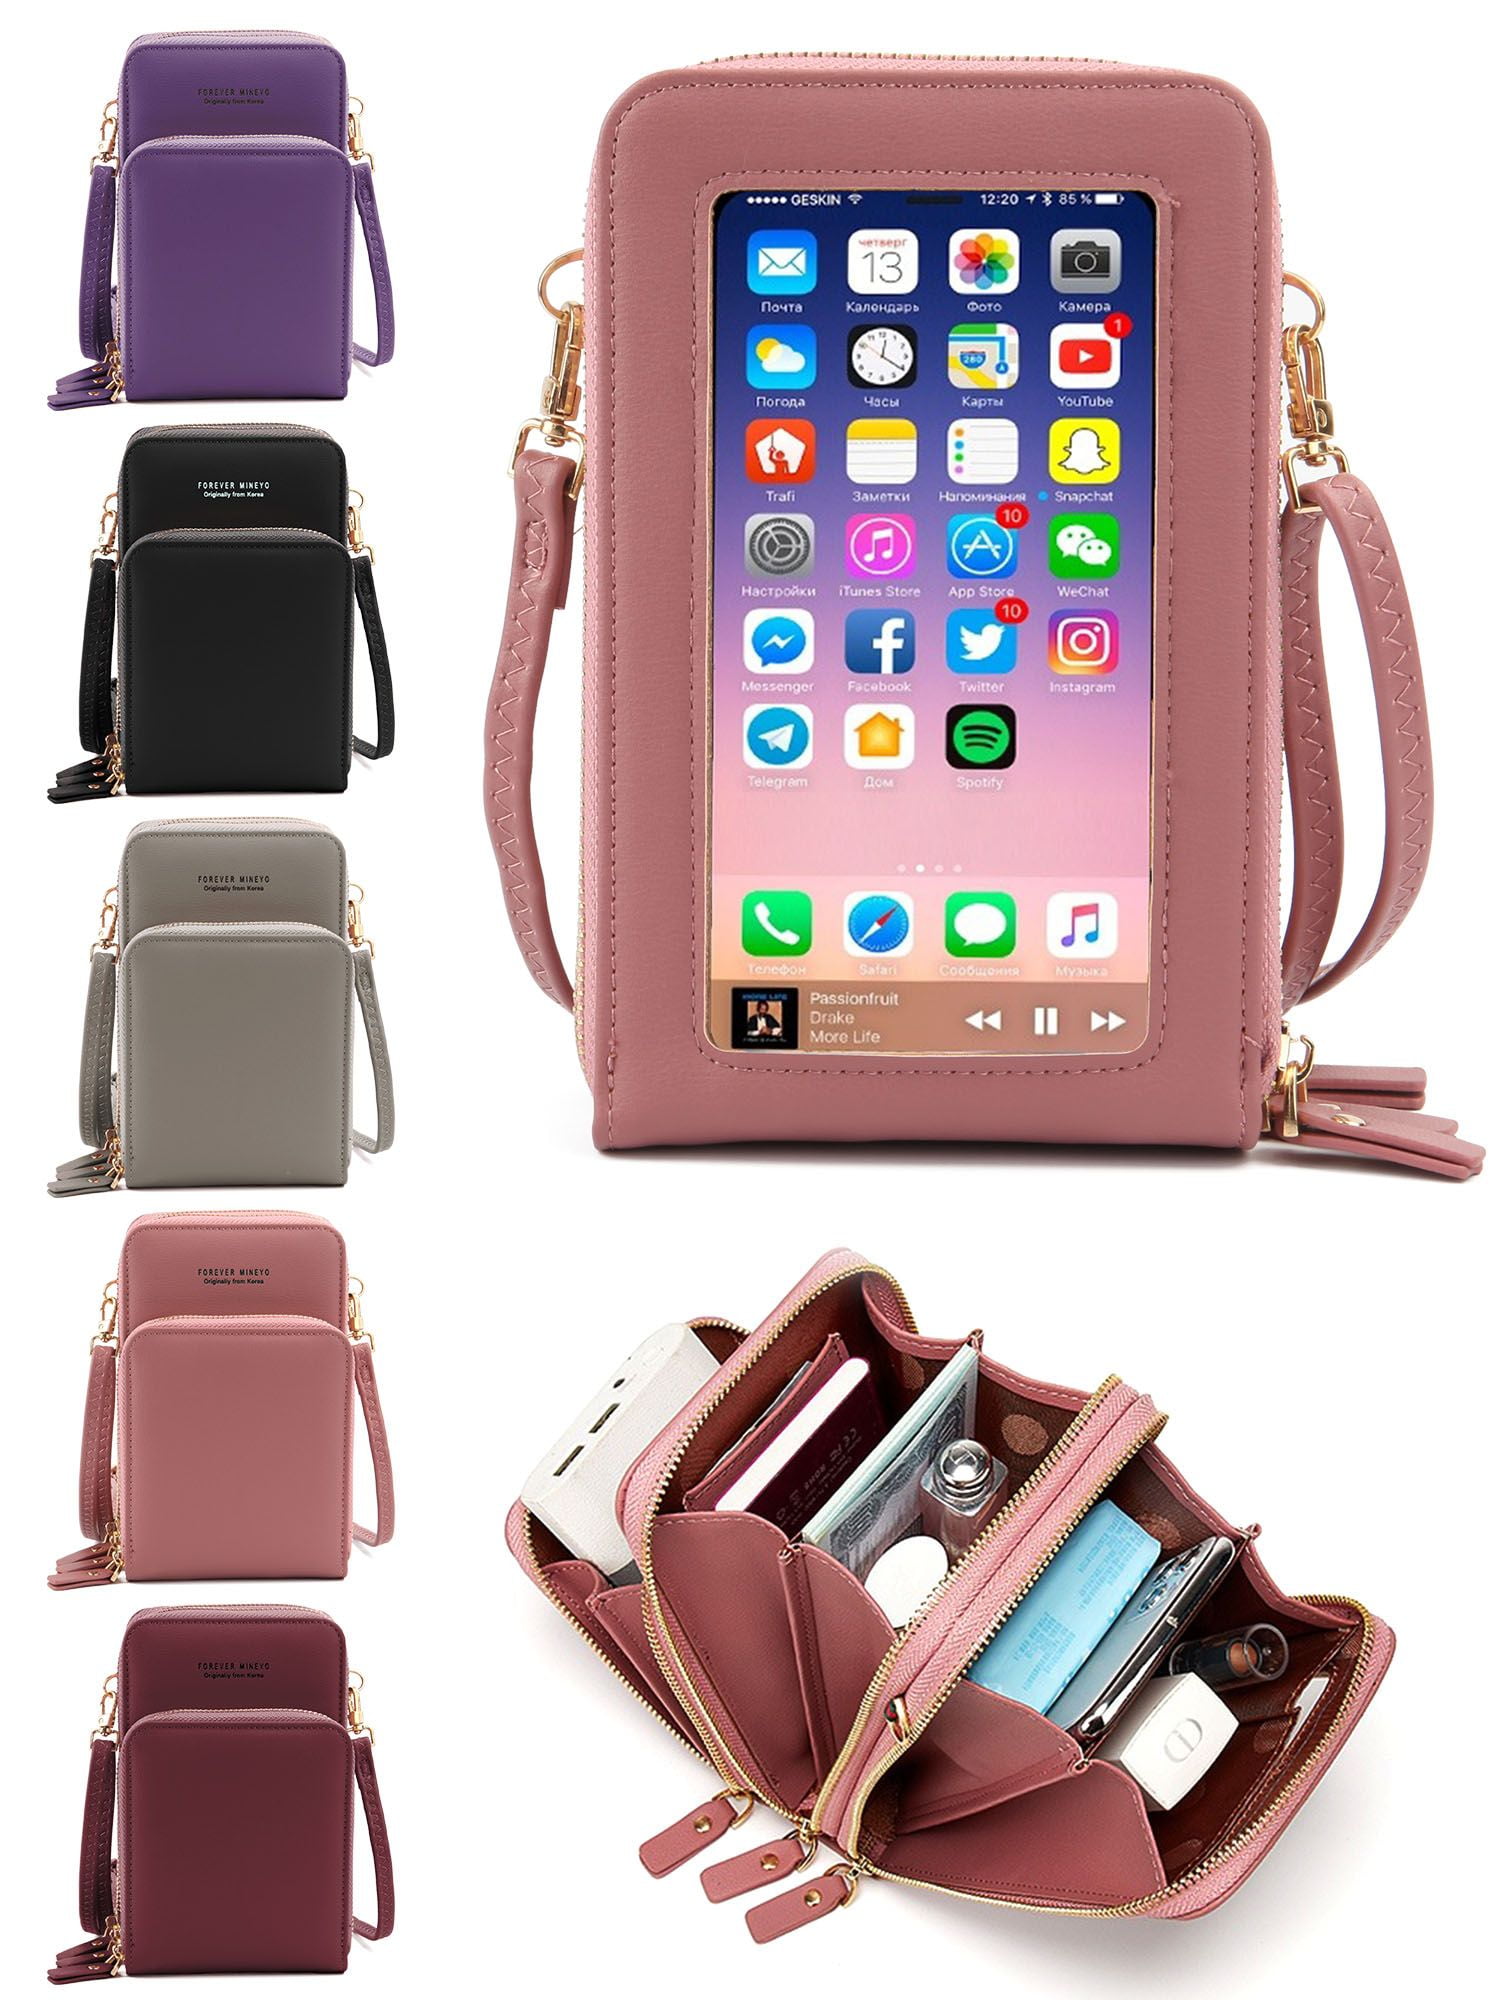 Spencer Women Crossbody Cellphone Pouch Waterproof Cellphone Purse Wallet  Touch Screen Shoulder Bag For iPhone 12, 12 Pro Max,11 Pro Max, 11 Pro, XS  Max Pink 